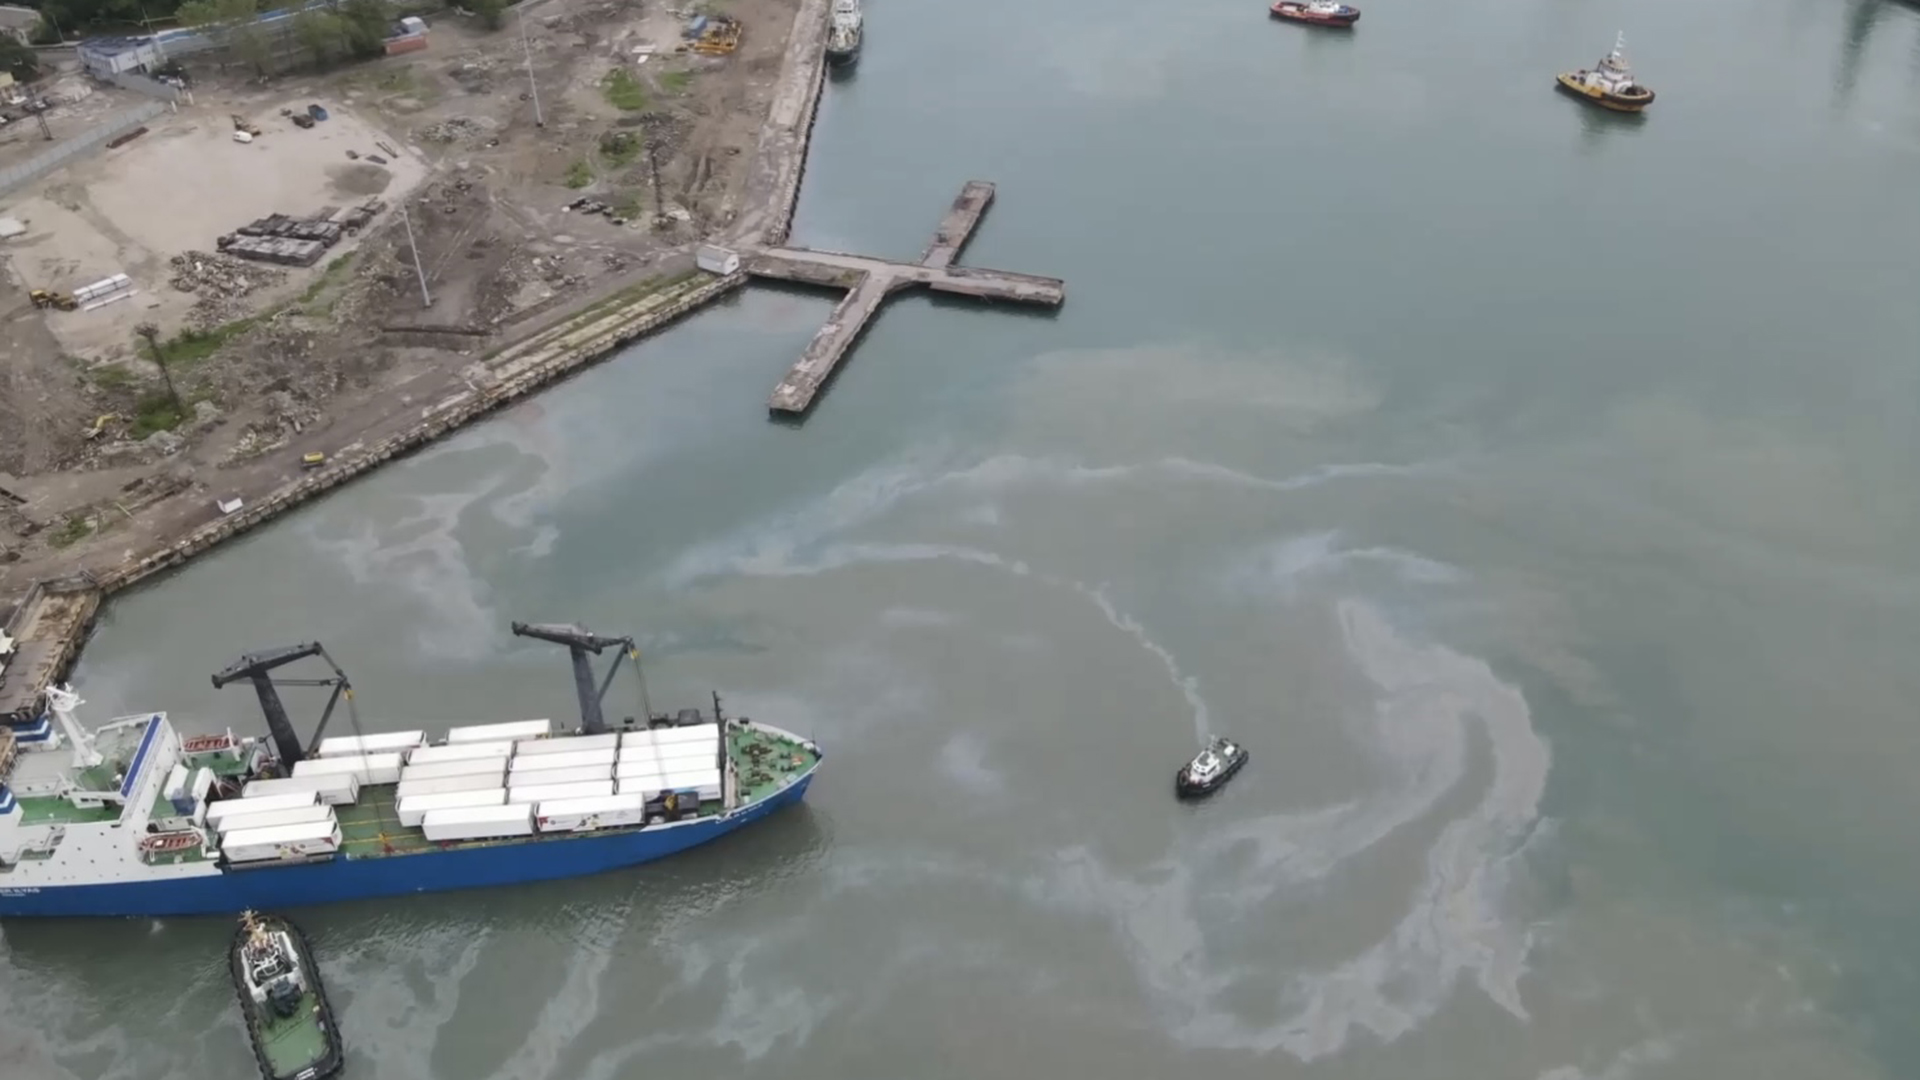 Oil pollution in the Black Sea near Tuapse has been repeatedly reported since 2018, according to the World Wildlife Fund (WWF).